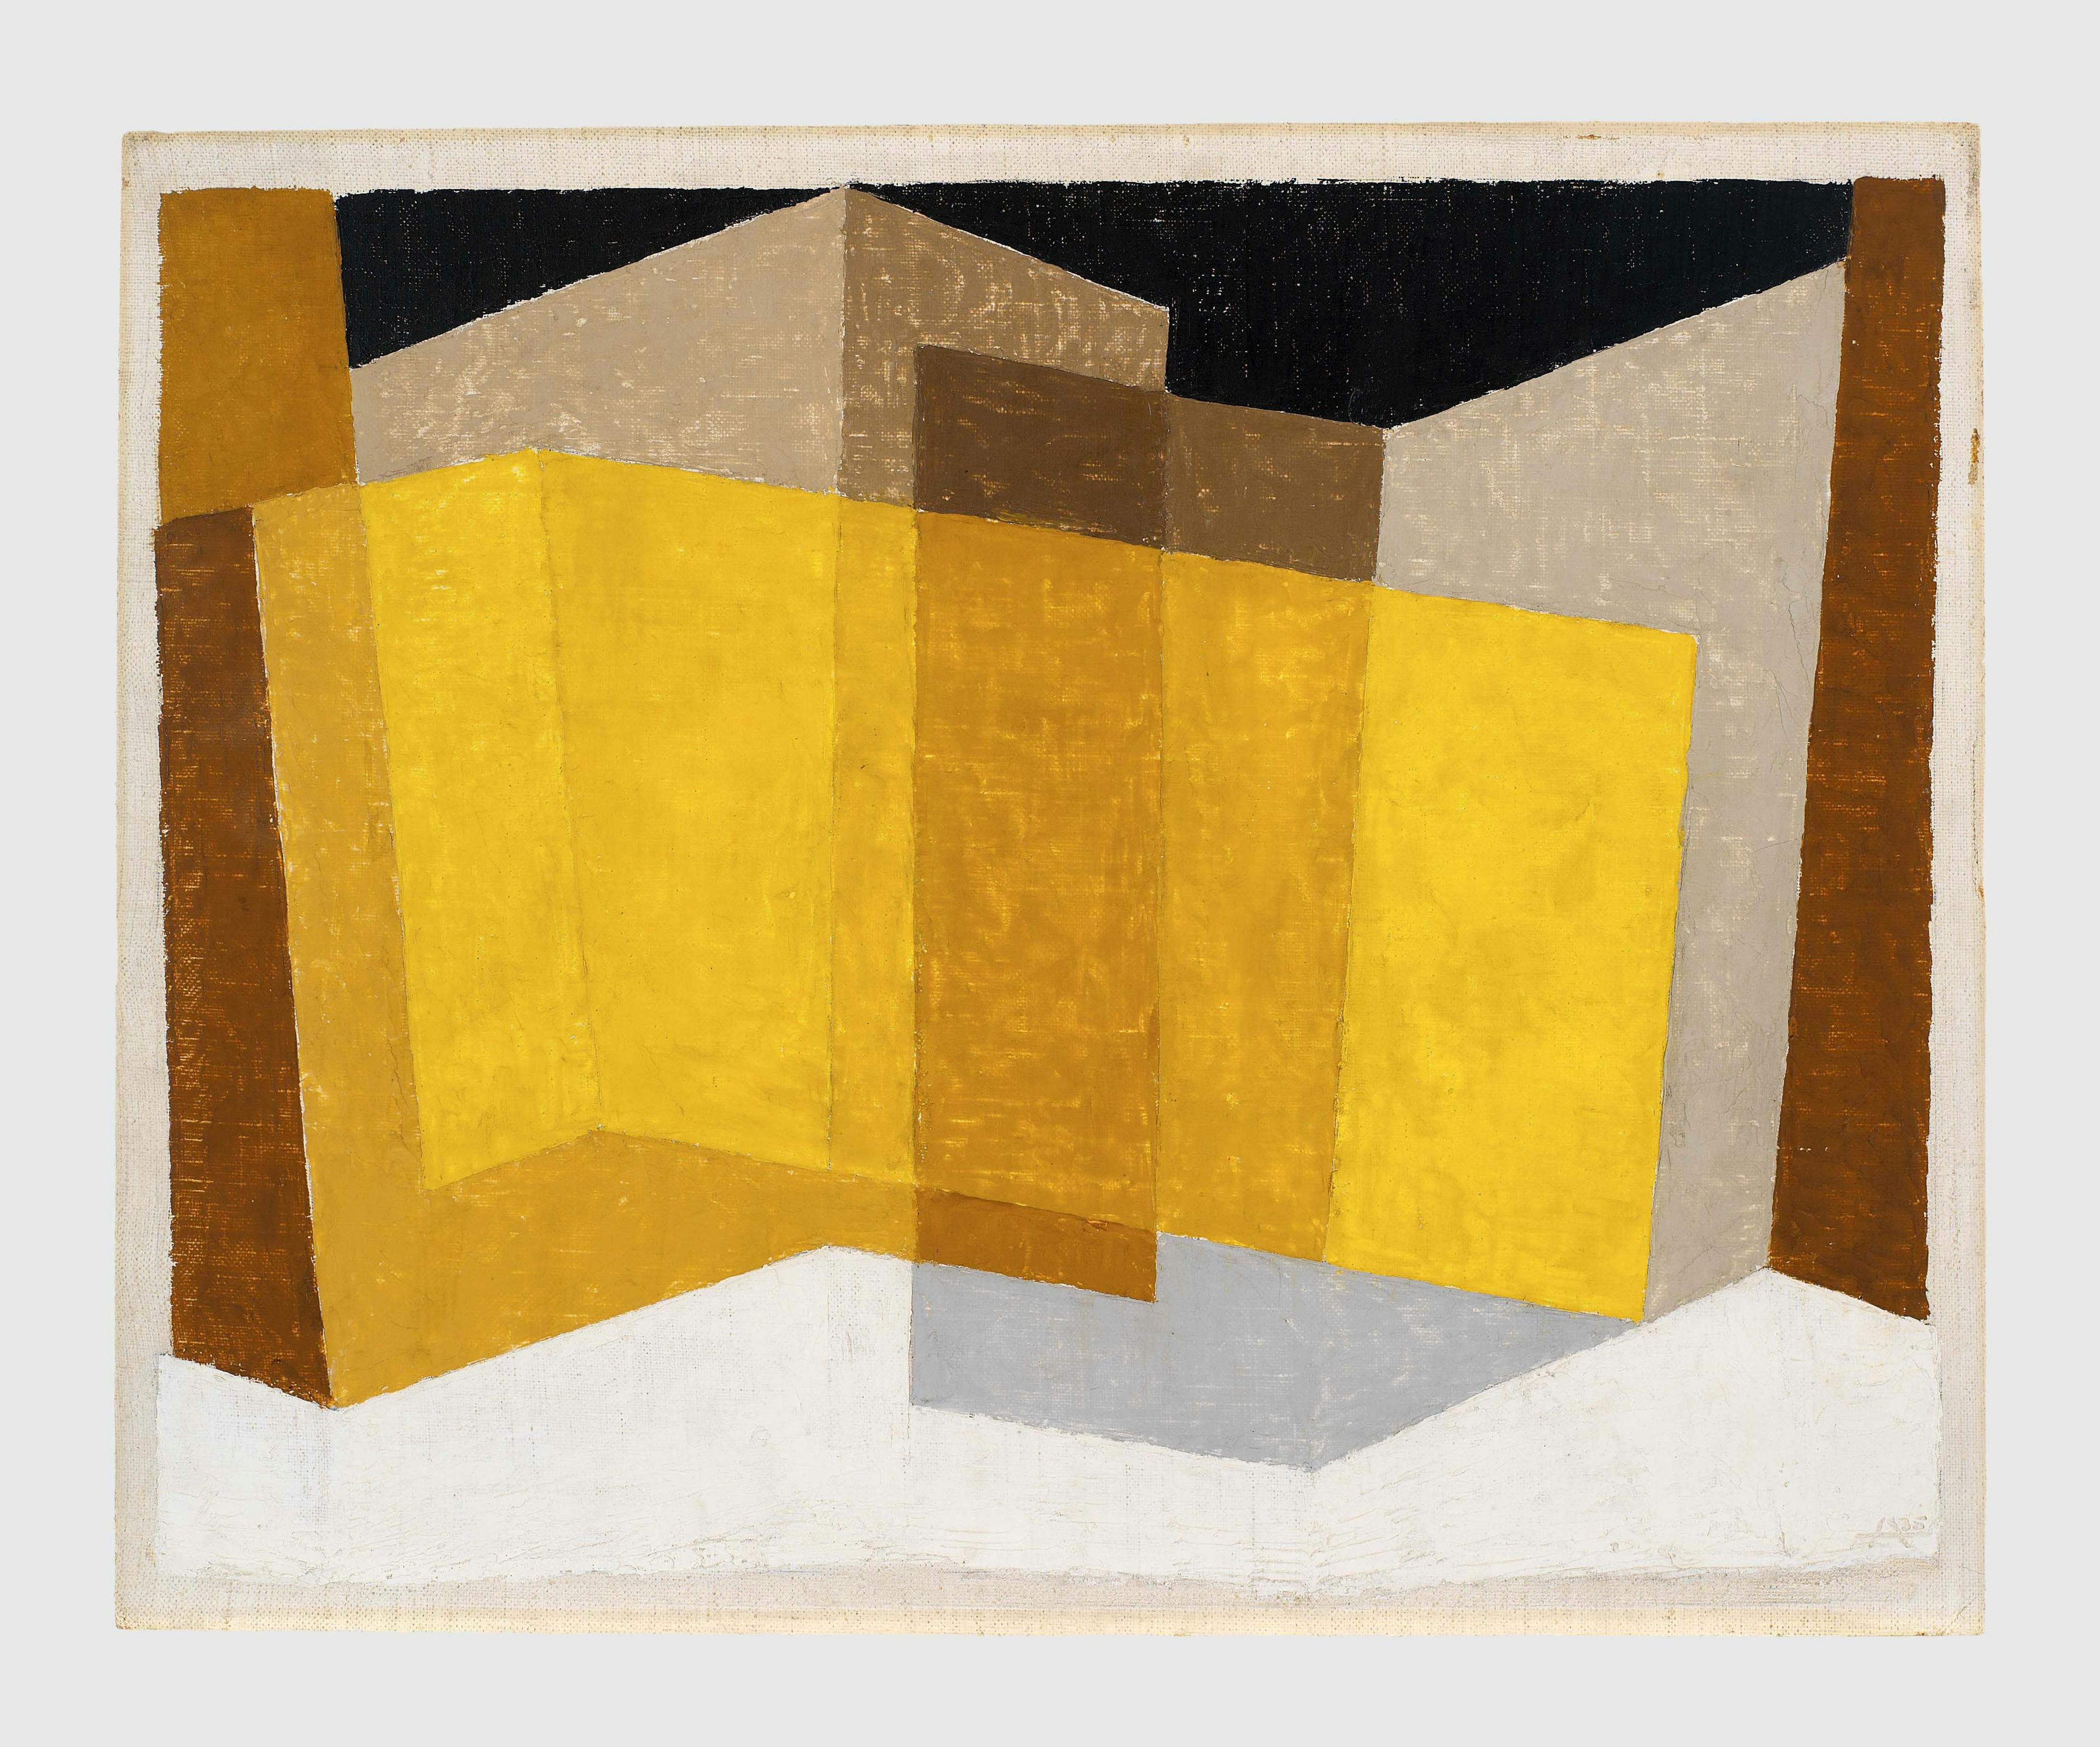 A painting by Josef Albers, titled Angular, dated 1935.